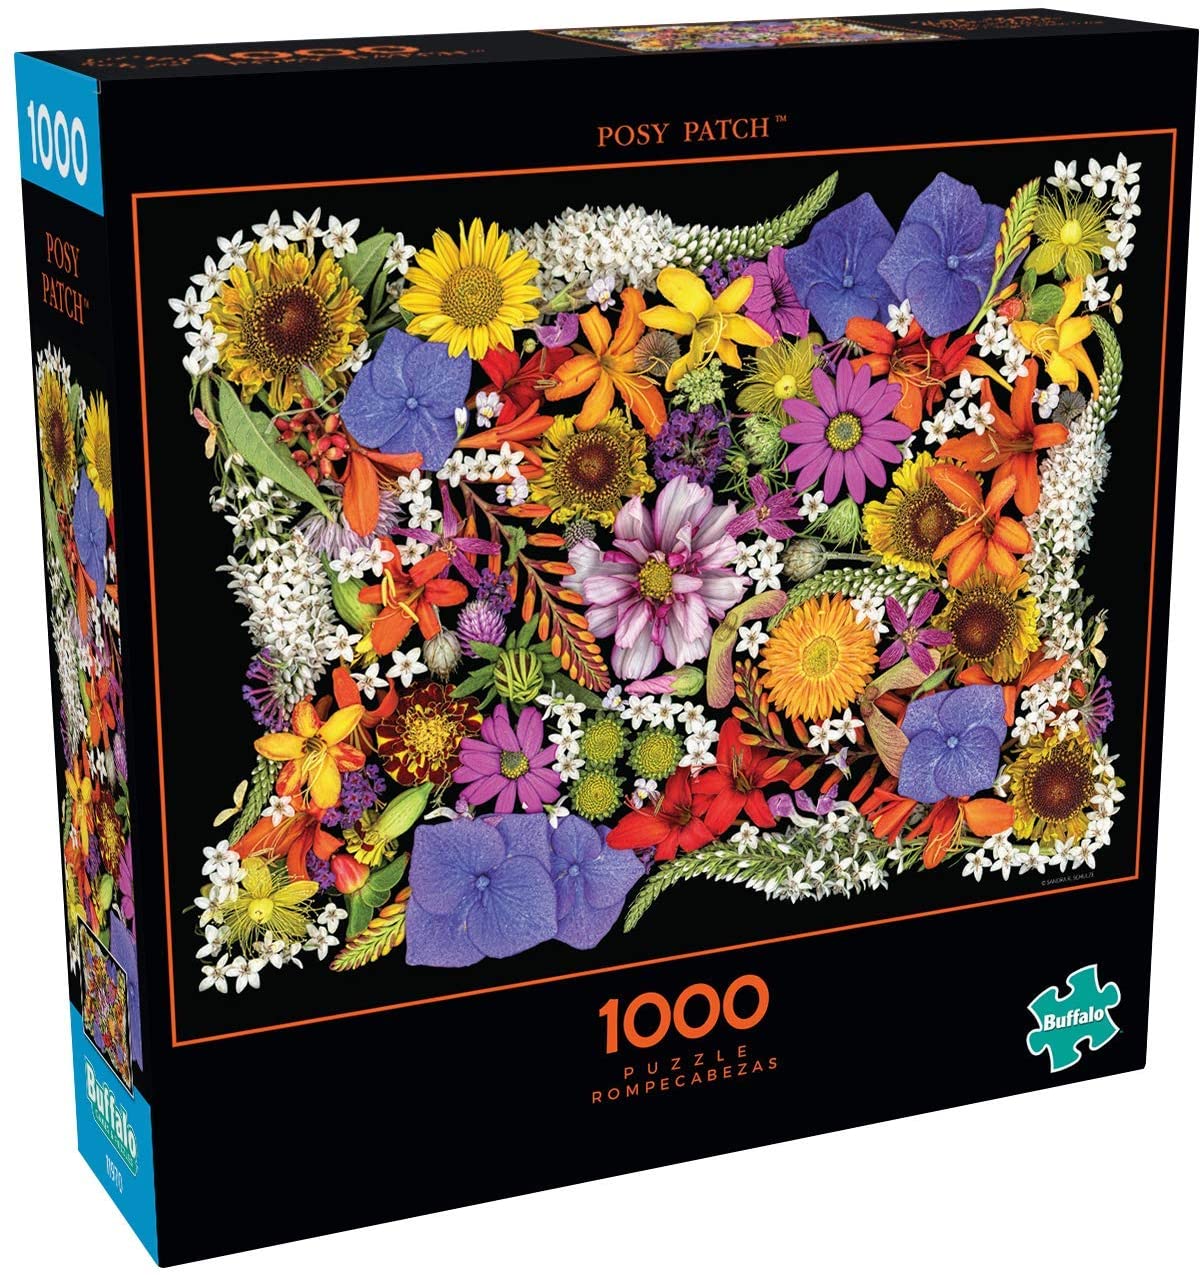 Buffalo Games Posy Patch 1000 Piece Jigsaw Puzzle $6.78 + FS w/  Prime or on orders of $25+